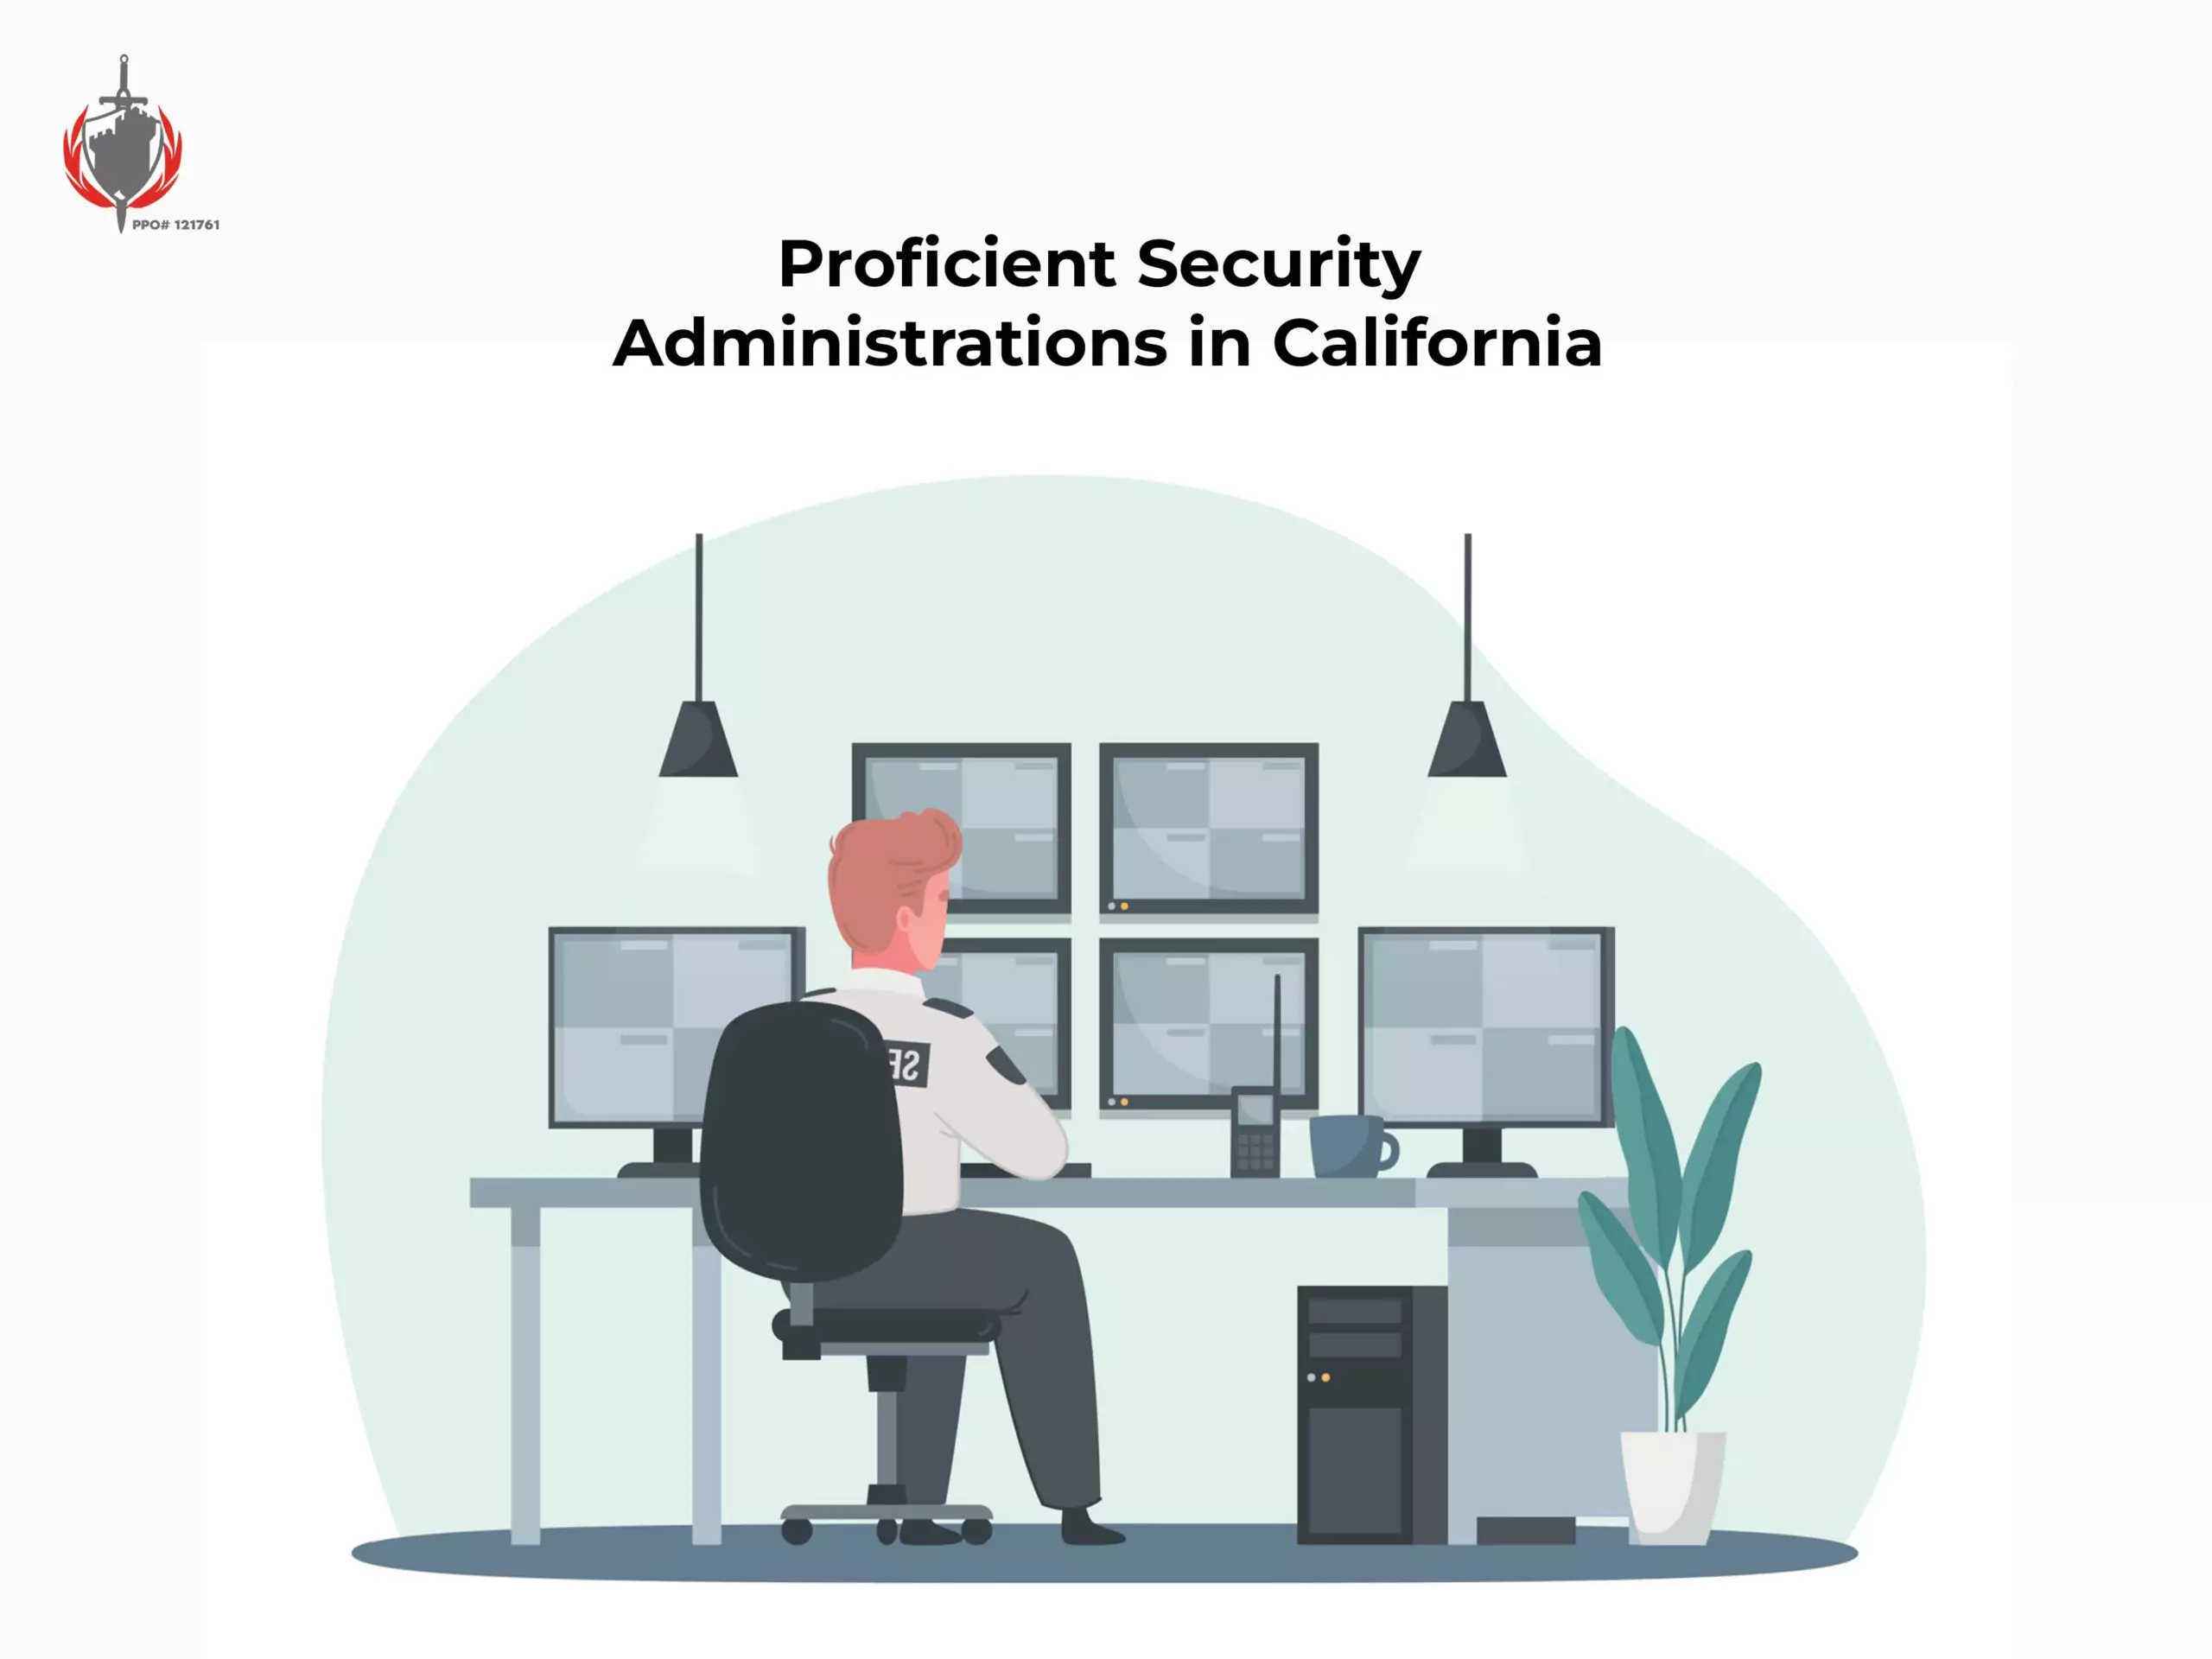 Proficient Security Administrations in California